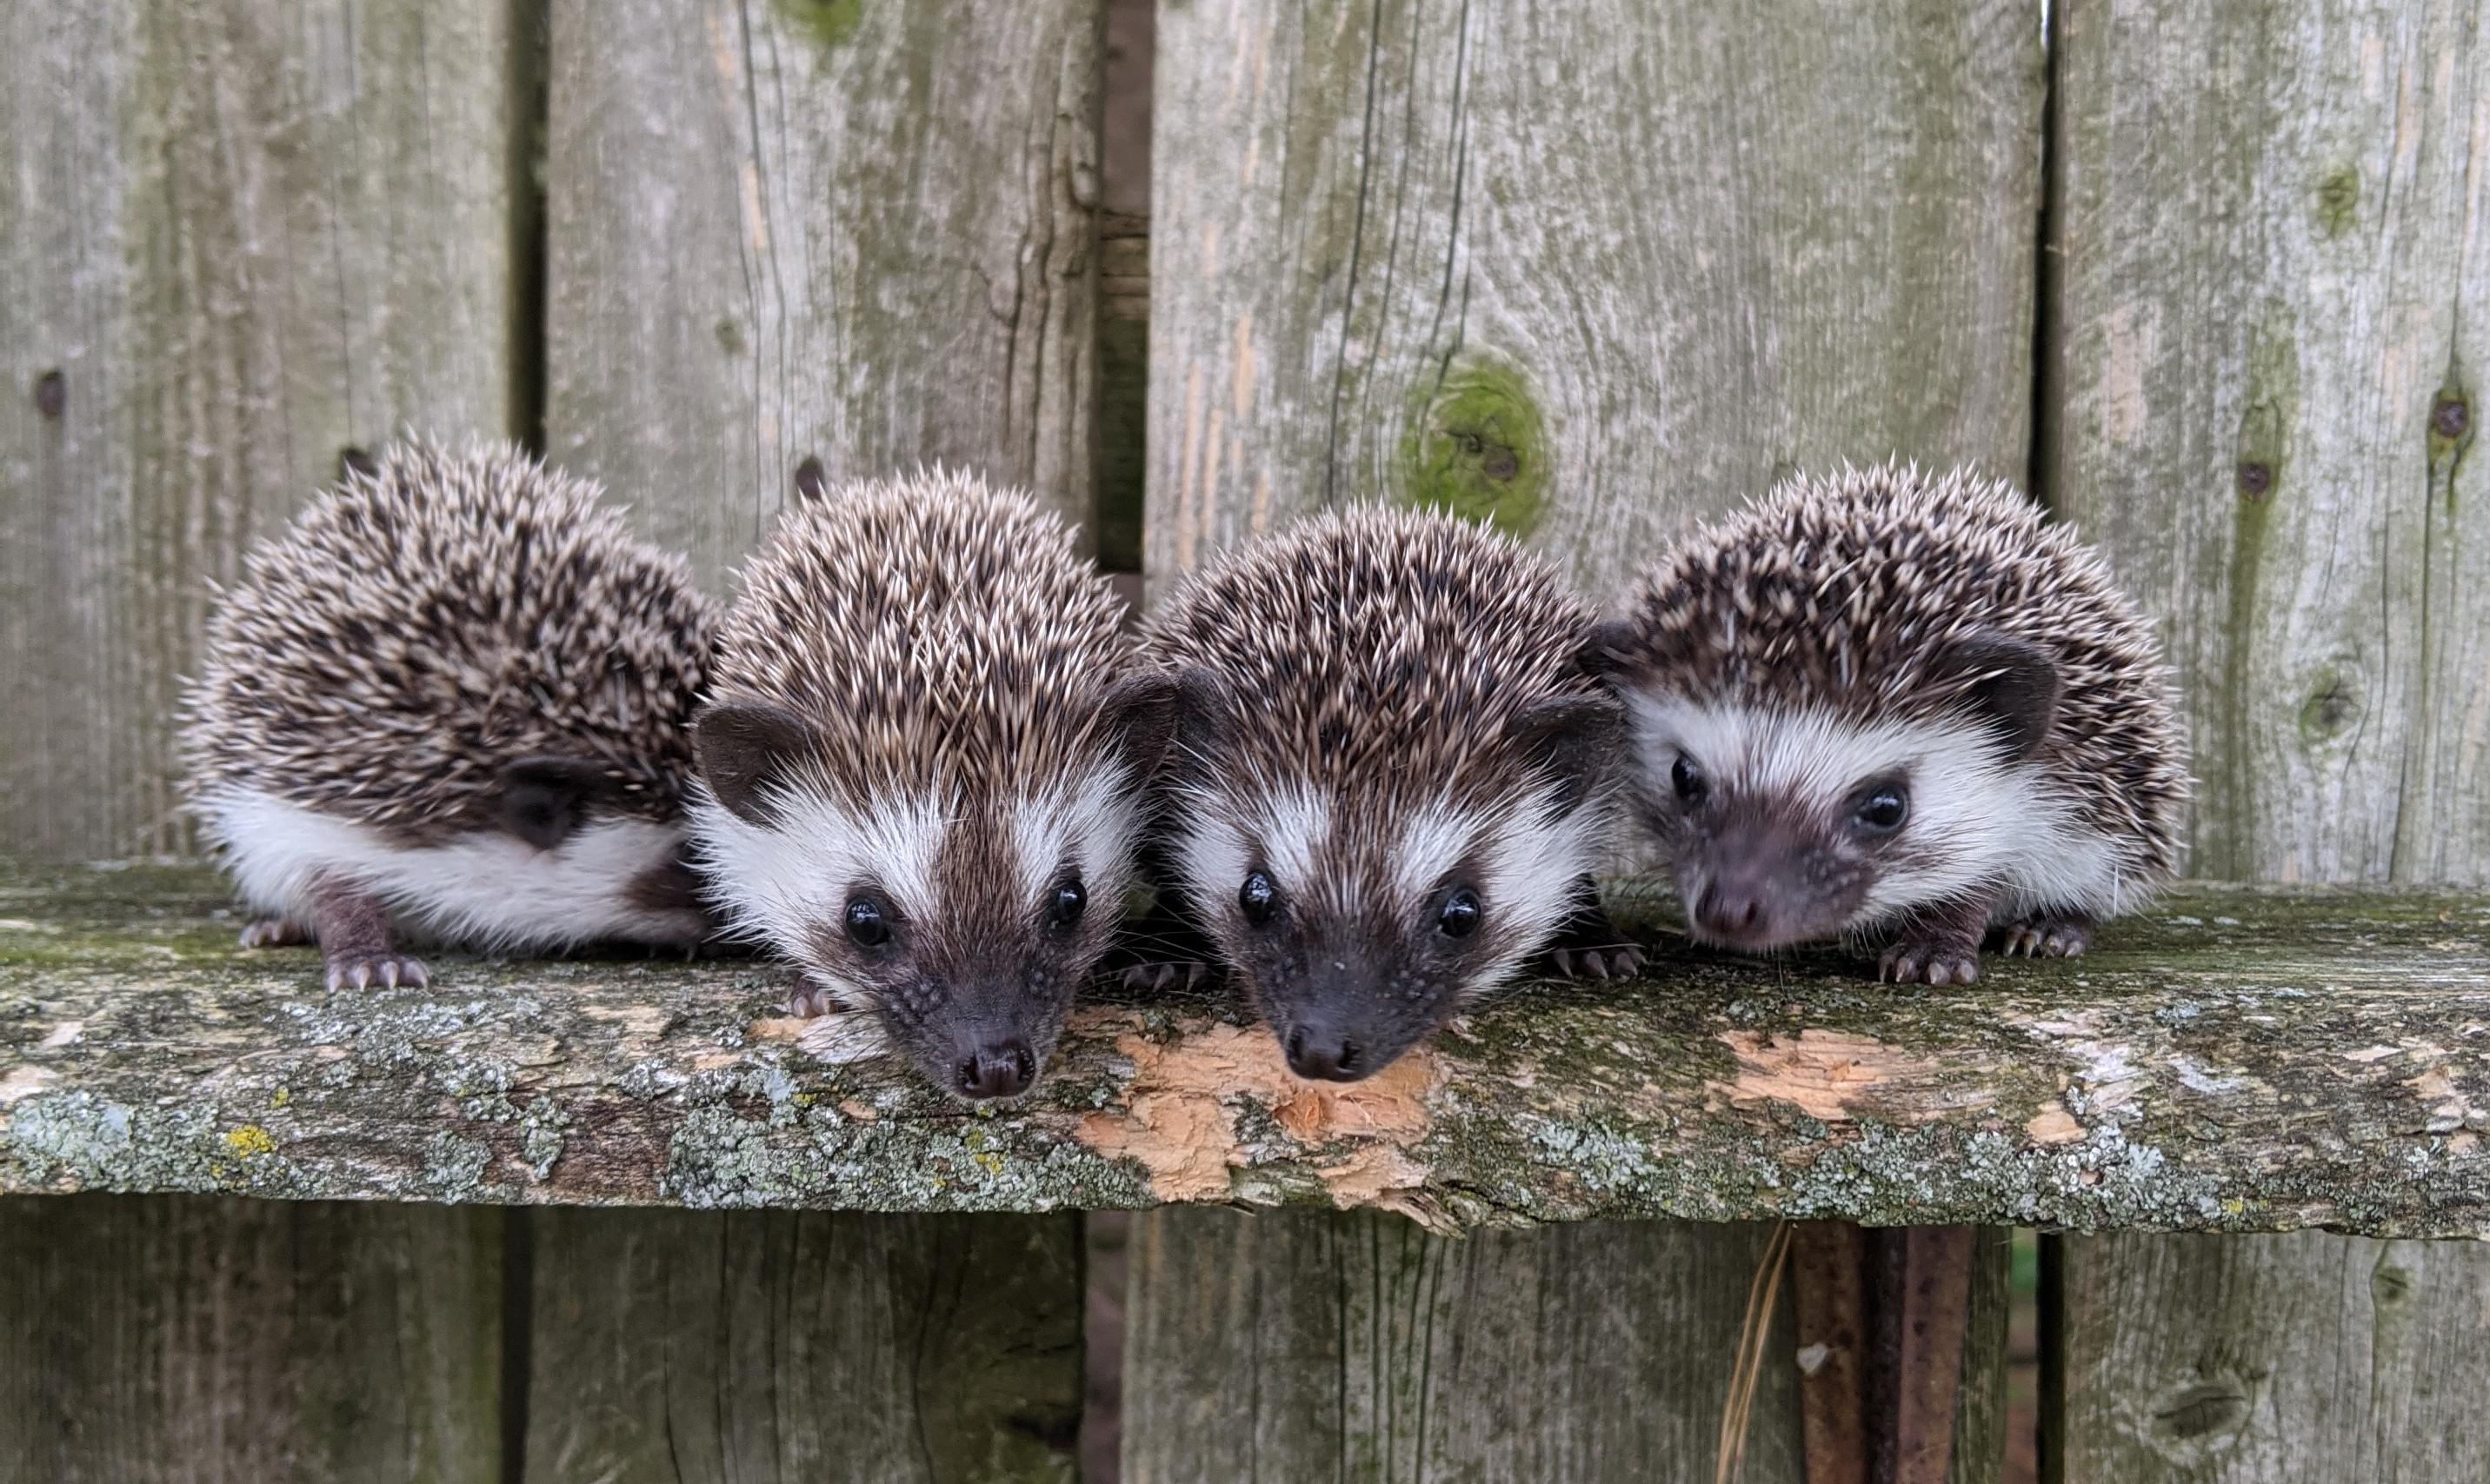 A group of hedgehogs is known as?